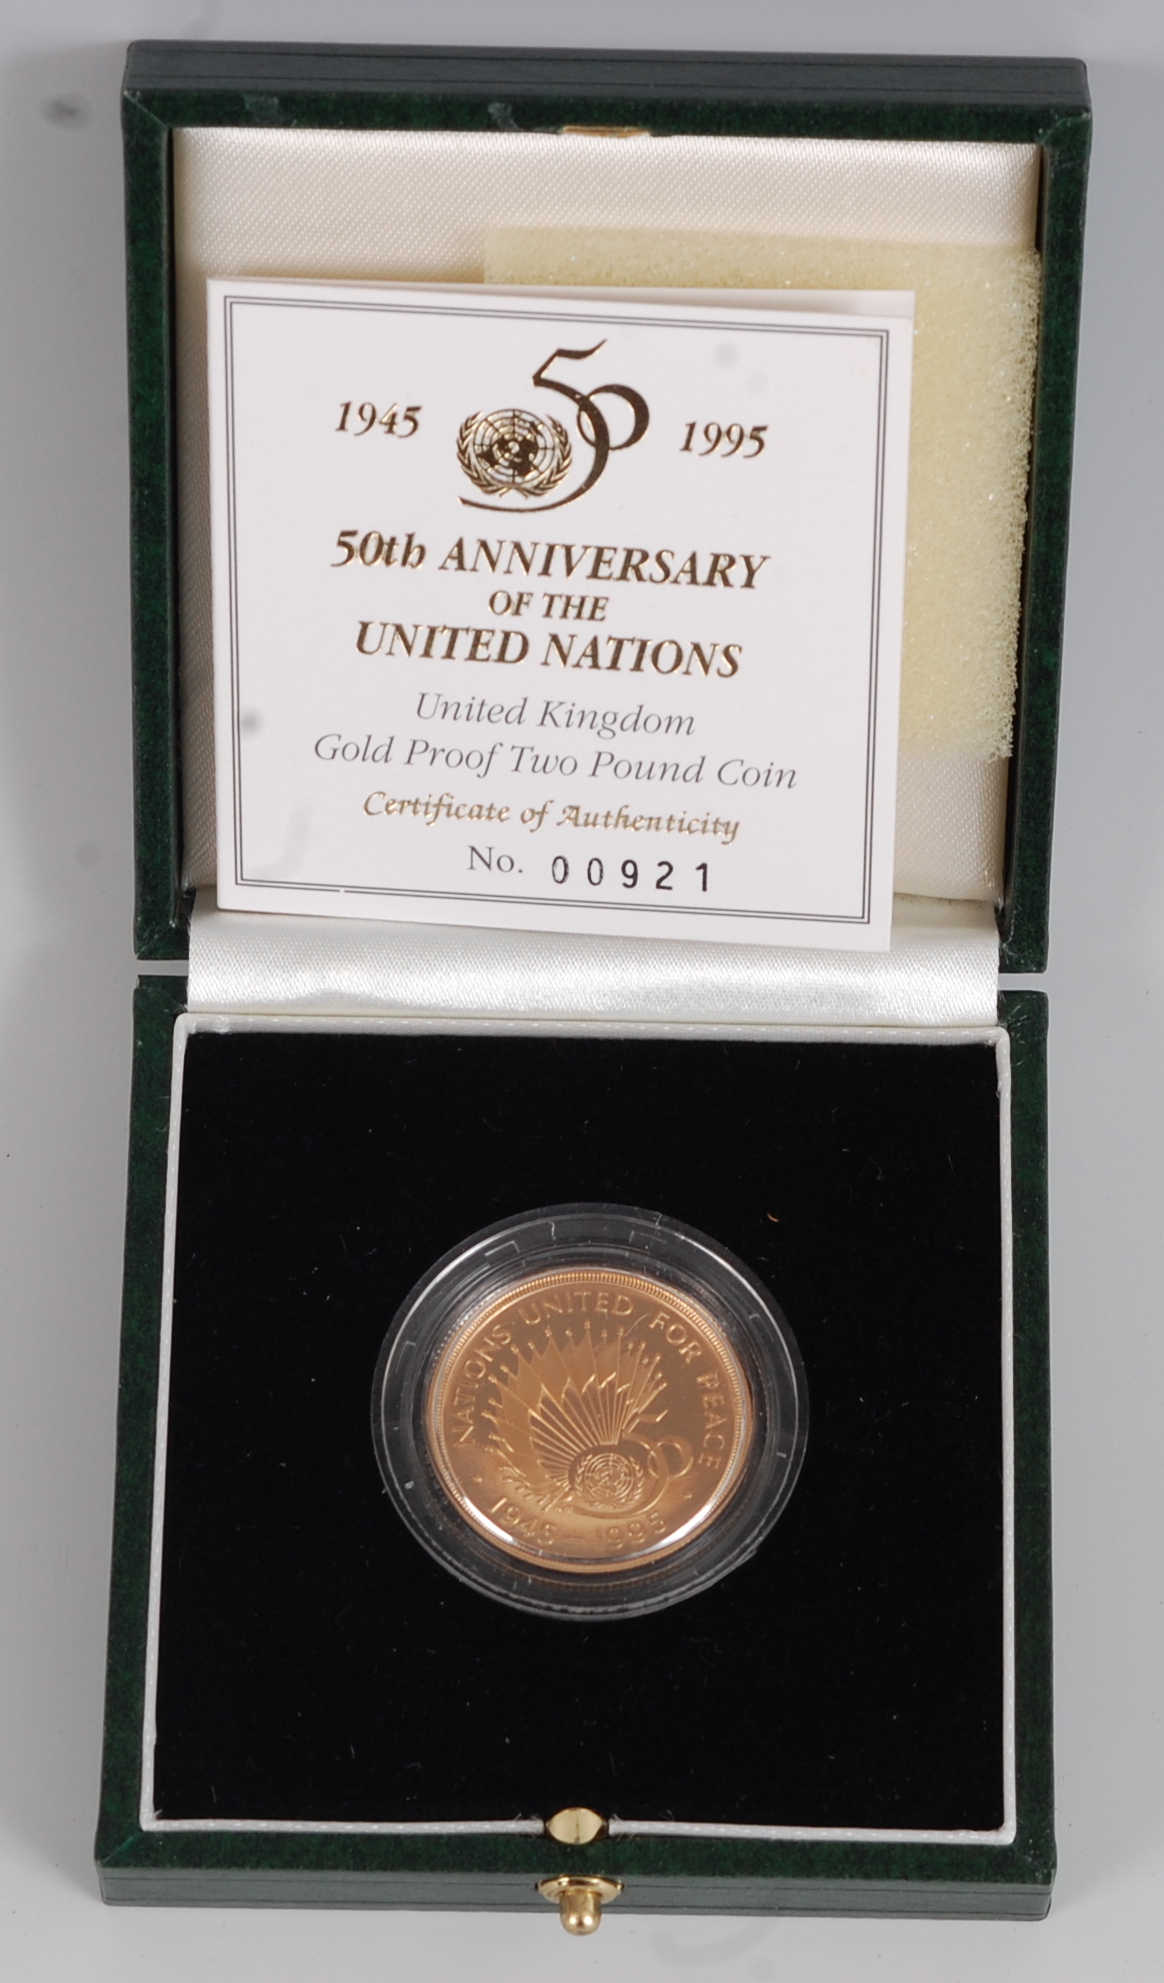 Great Britain, a cased gold proof two-pound coin, 50th Anniversary of the United Nations 1945-